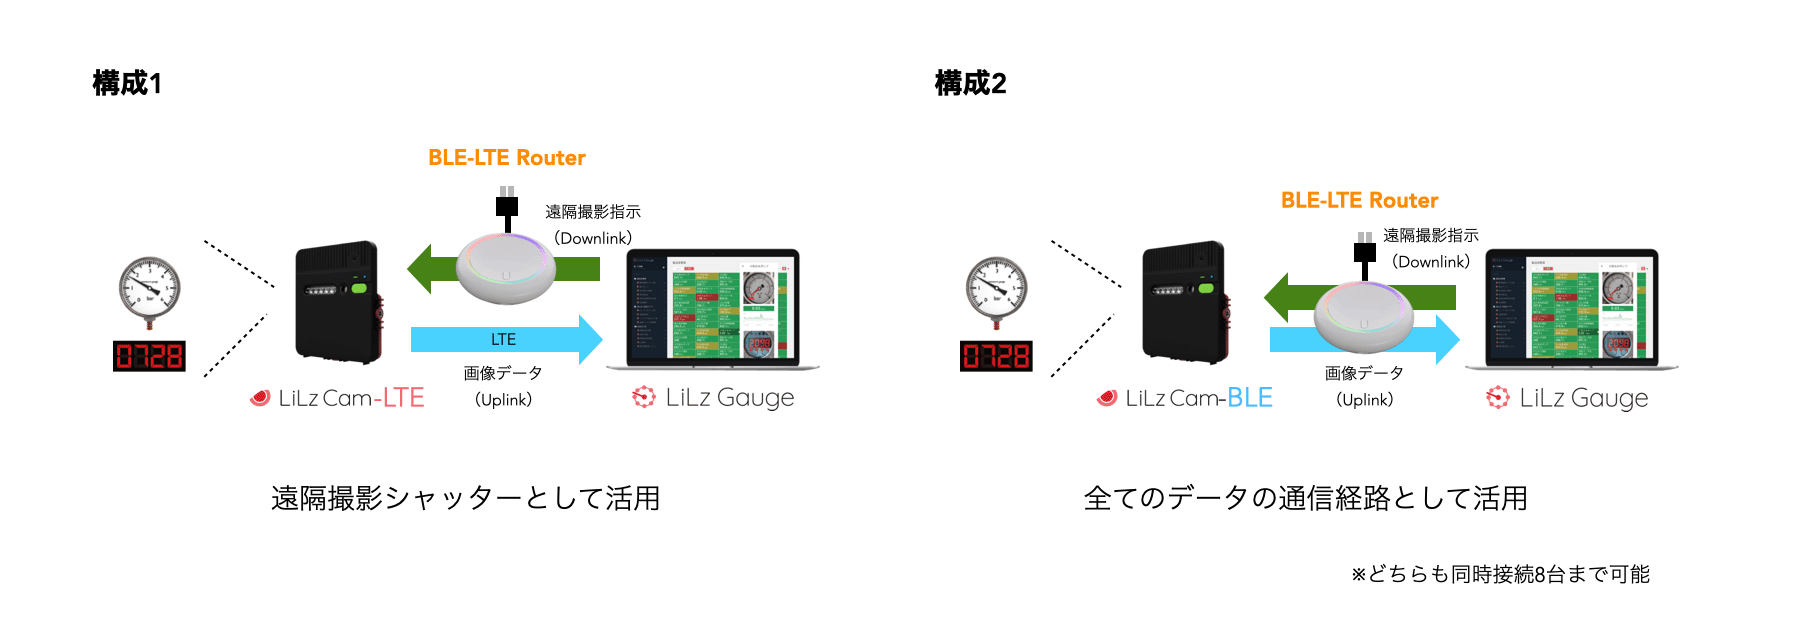 BLE-LTE Routerの利用構成